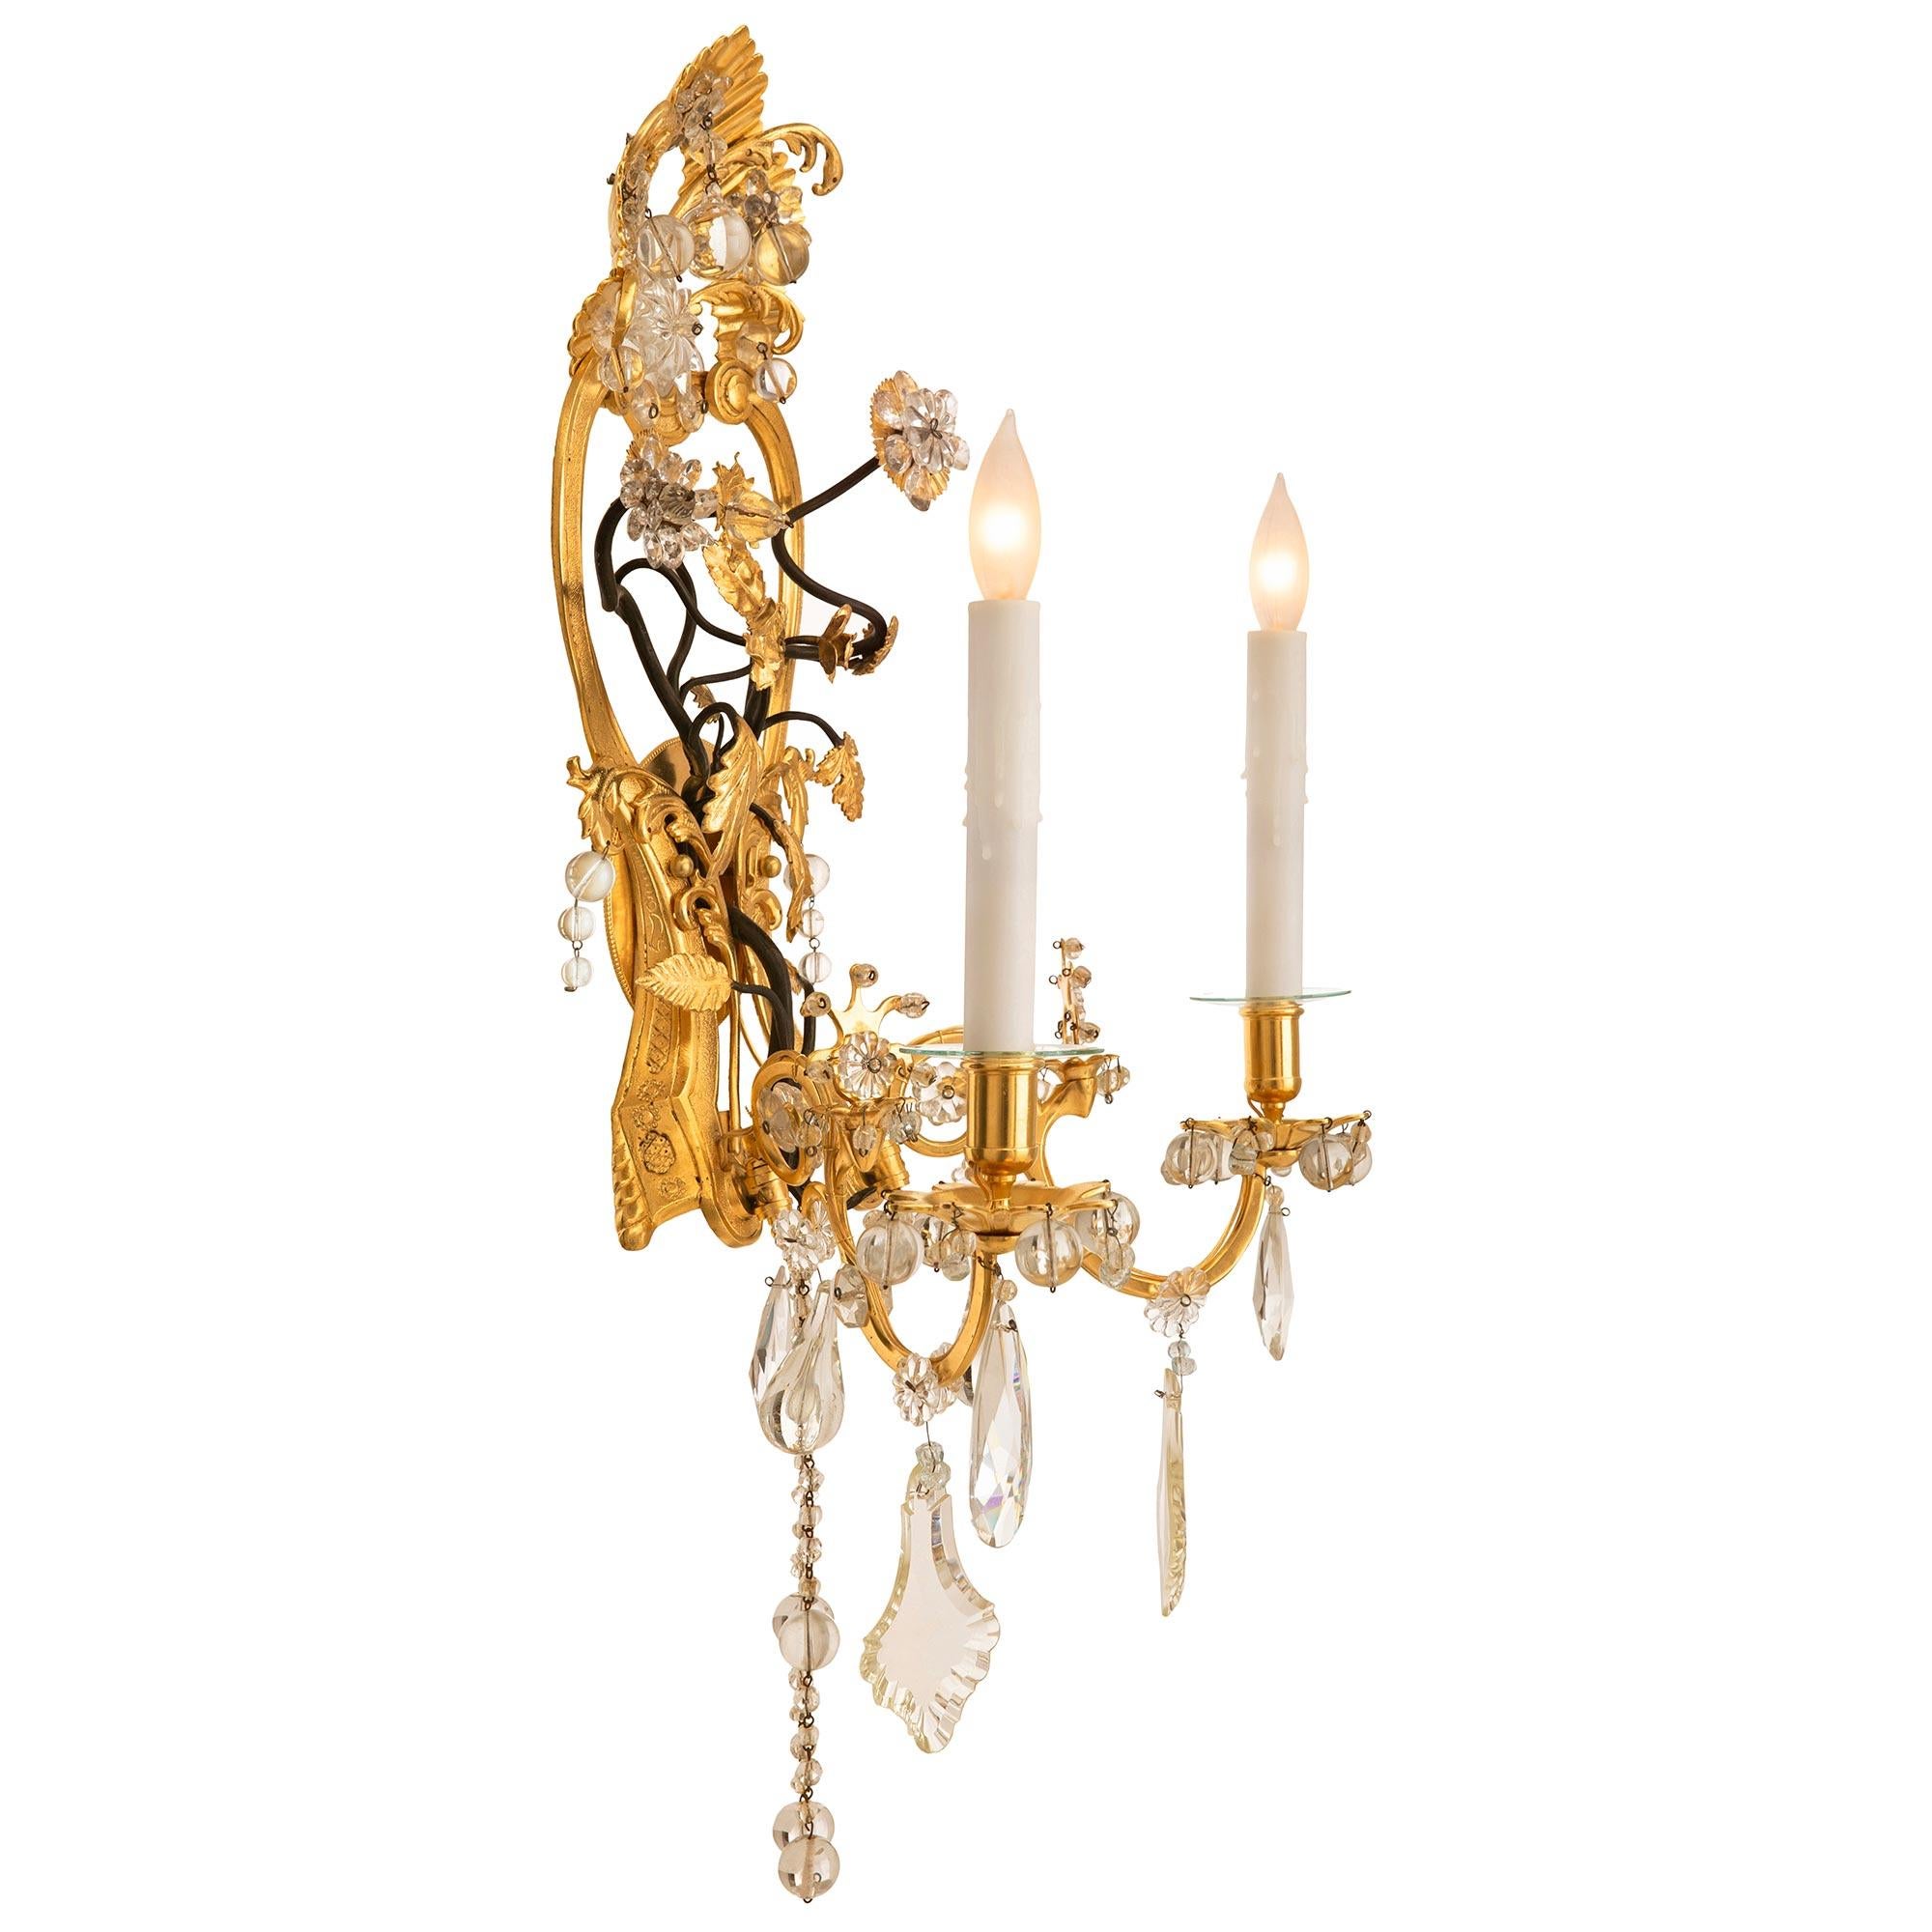 An exceptional and very unique pair of Italian turn of the century Louis XVI st. ormolu and crystal sconces. Each two arm sconce displays a striking pierced backplate with a beautiful and most elegant scrolled shape with a stunning reeded seashell